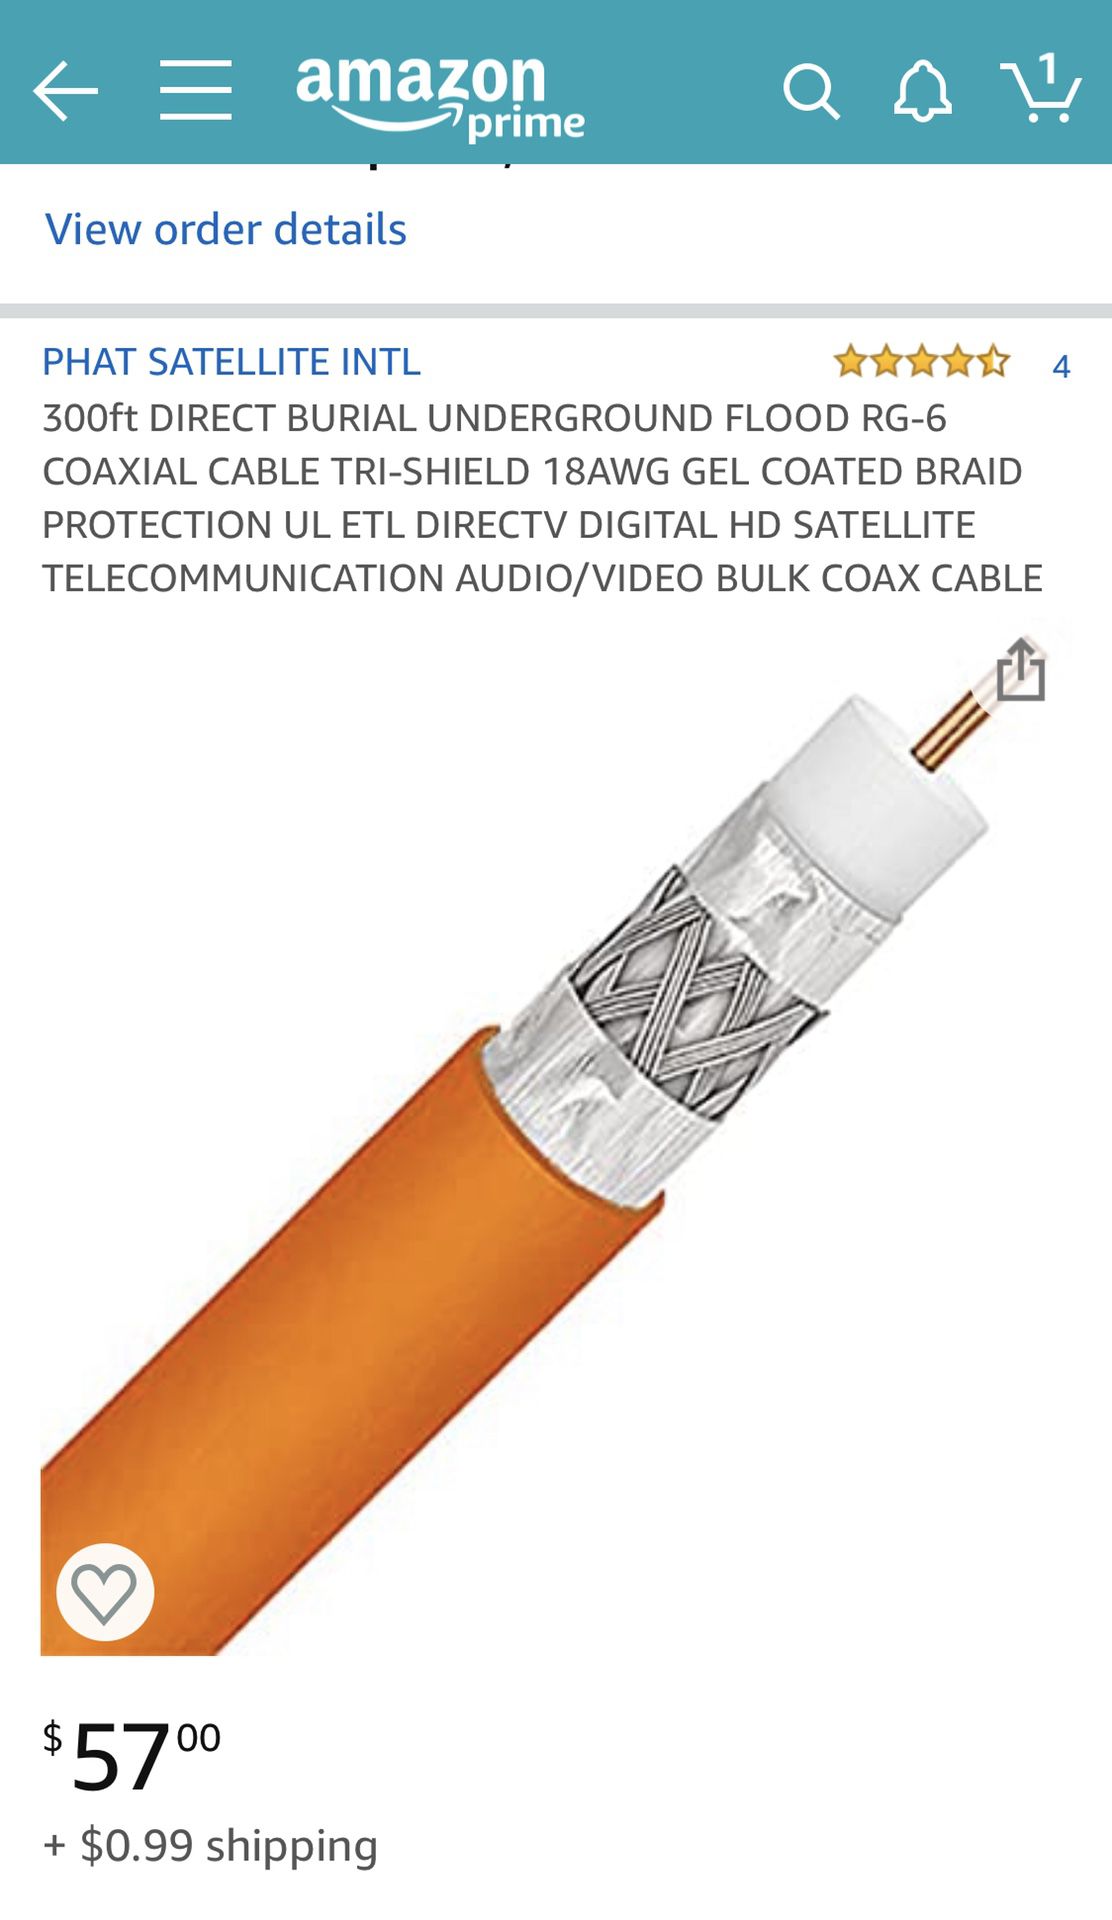 RG6 underground cable, coax cable